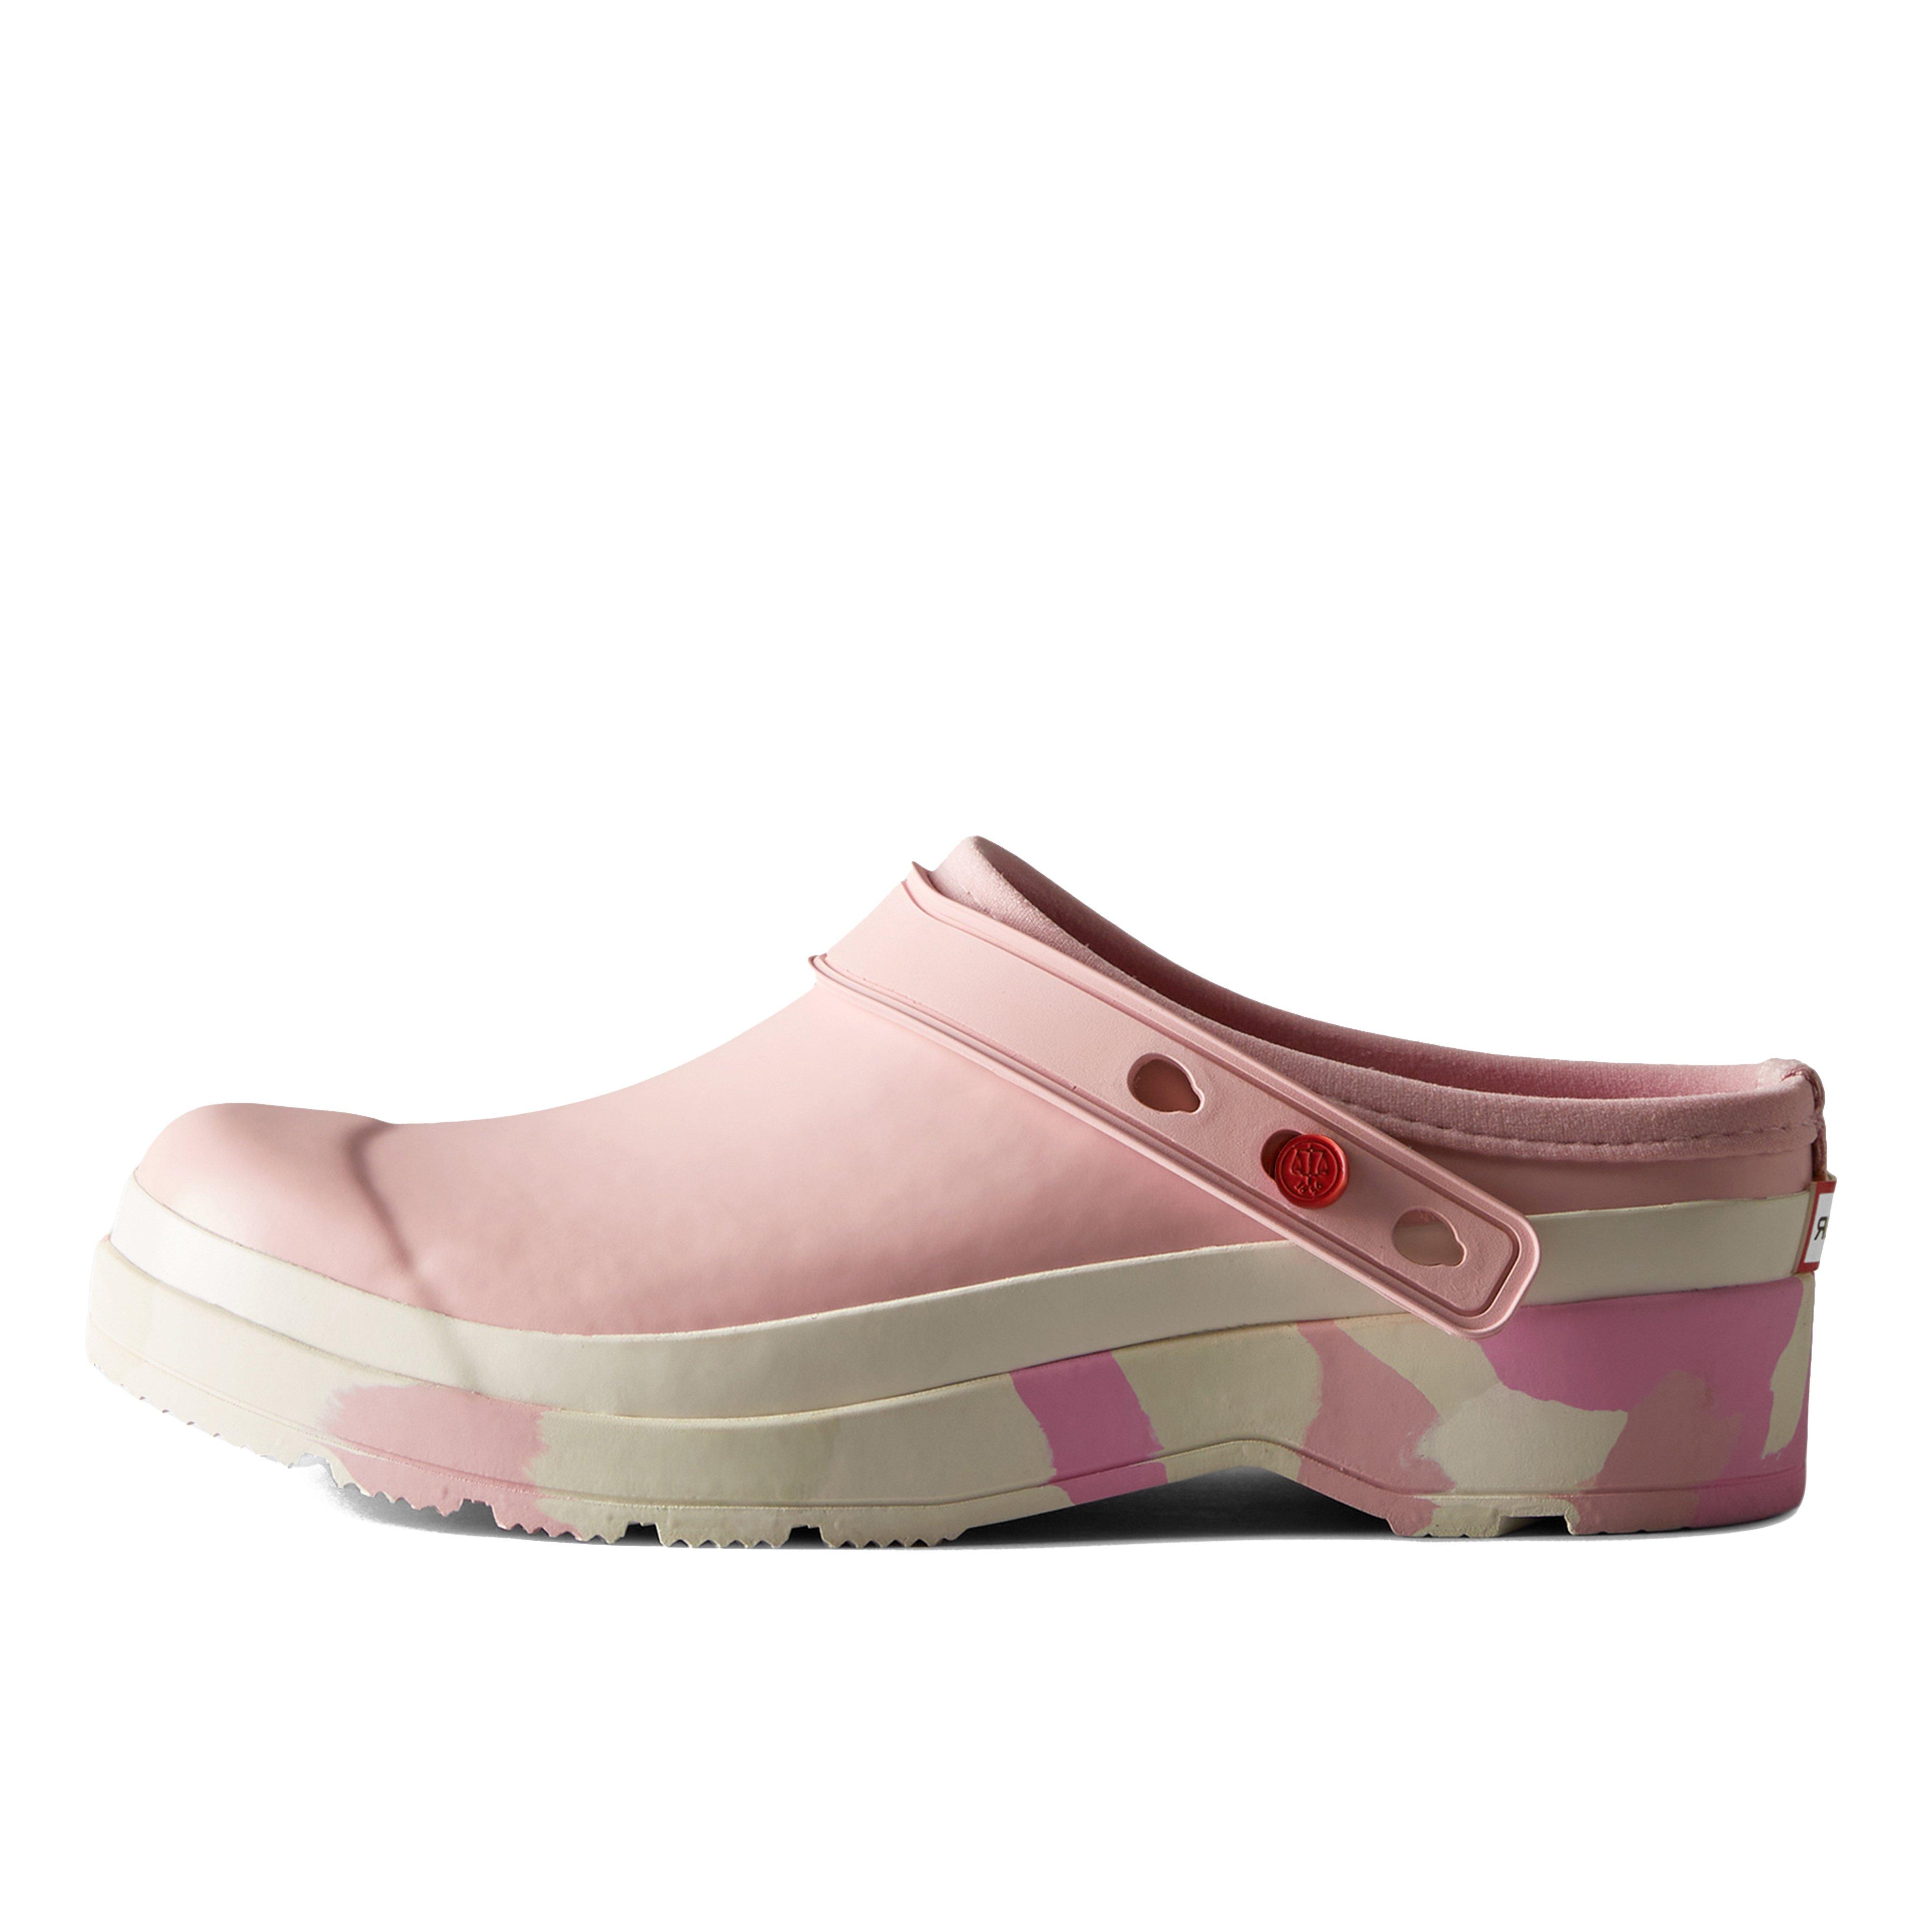 Womens Play Colour Splash Sole Strap Clogs Faded Rose/Shaded White/Pink Fizz/Skimmed Stones